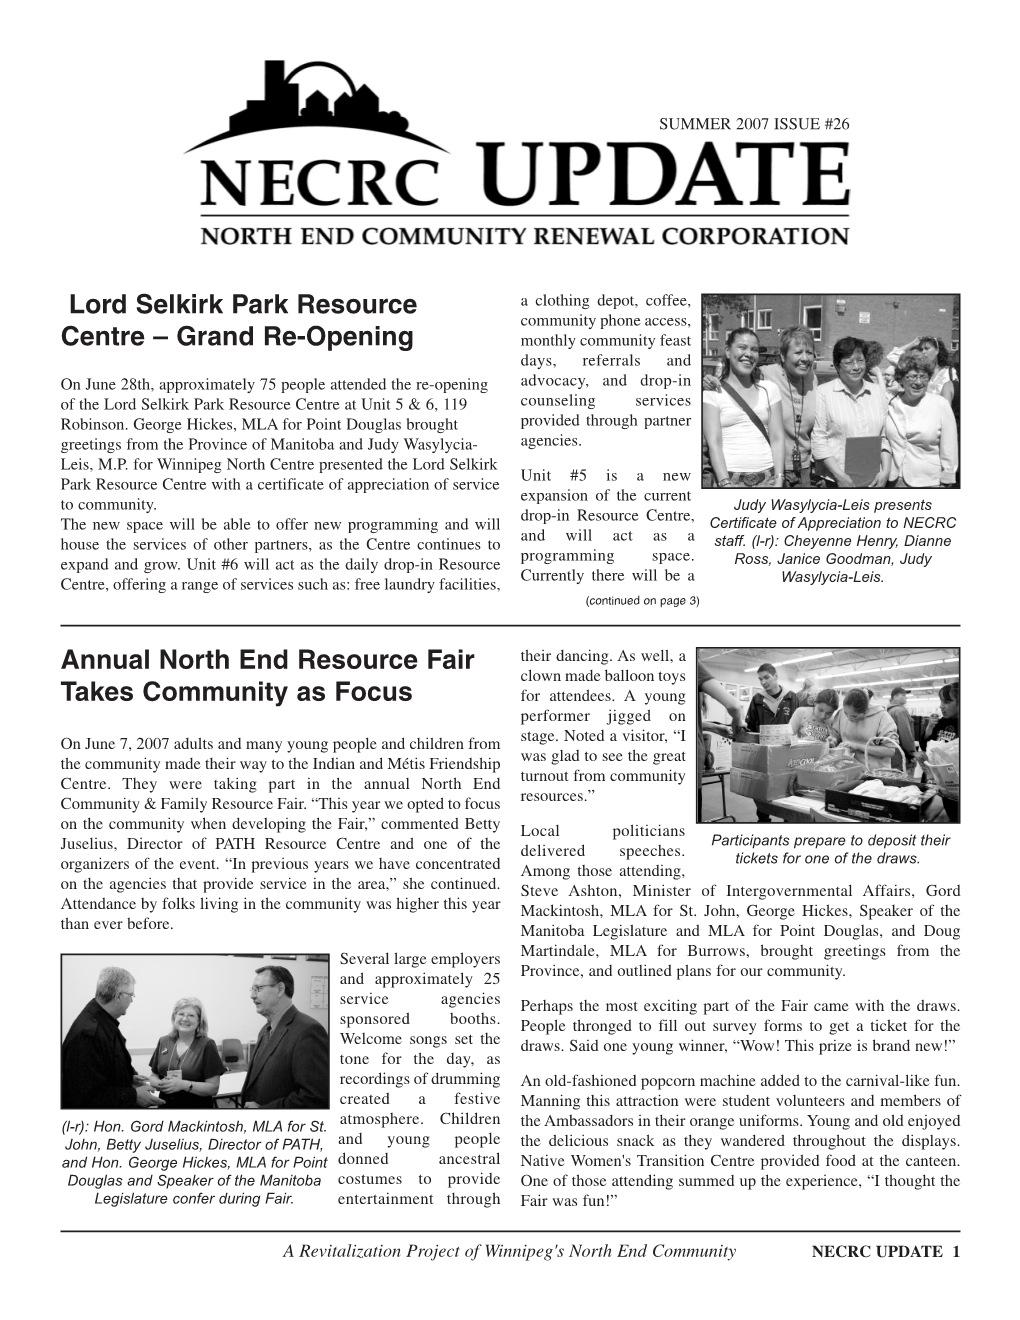 Lord Selkirk Park Resource Centre – Grand Re-Opening